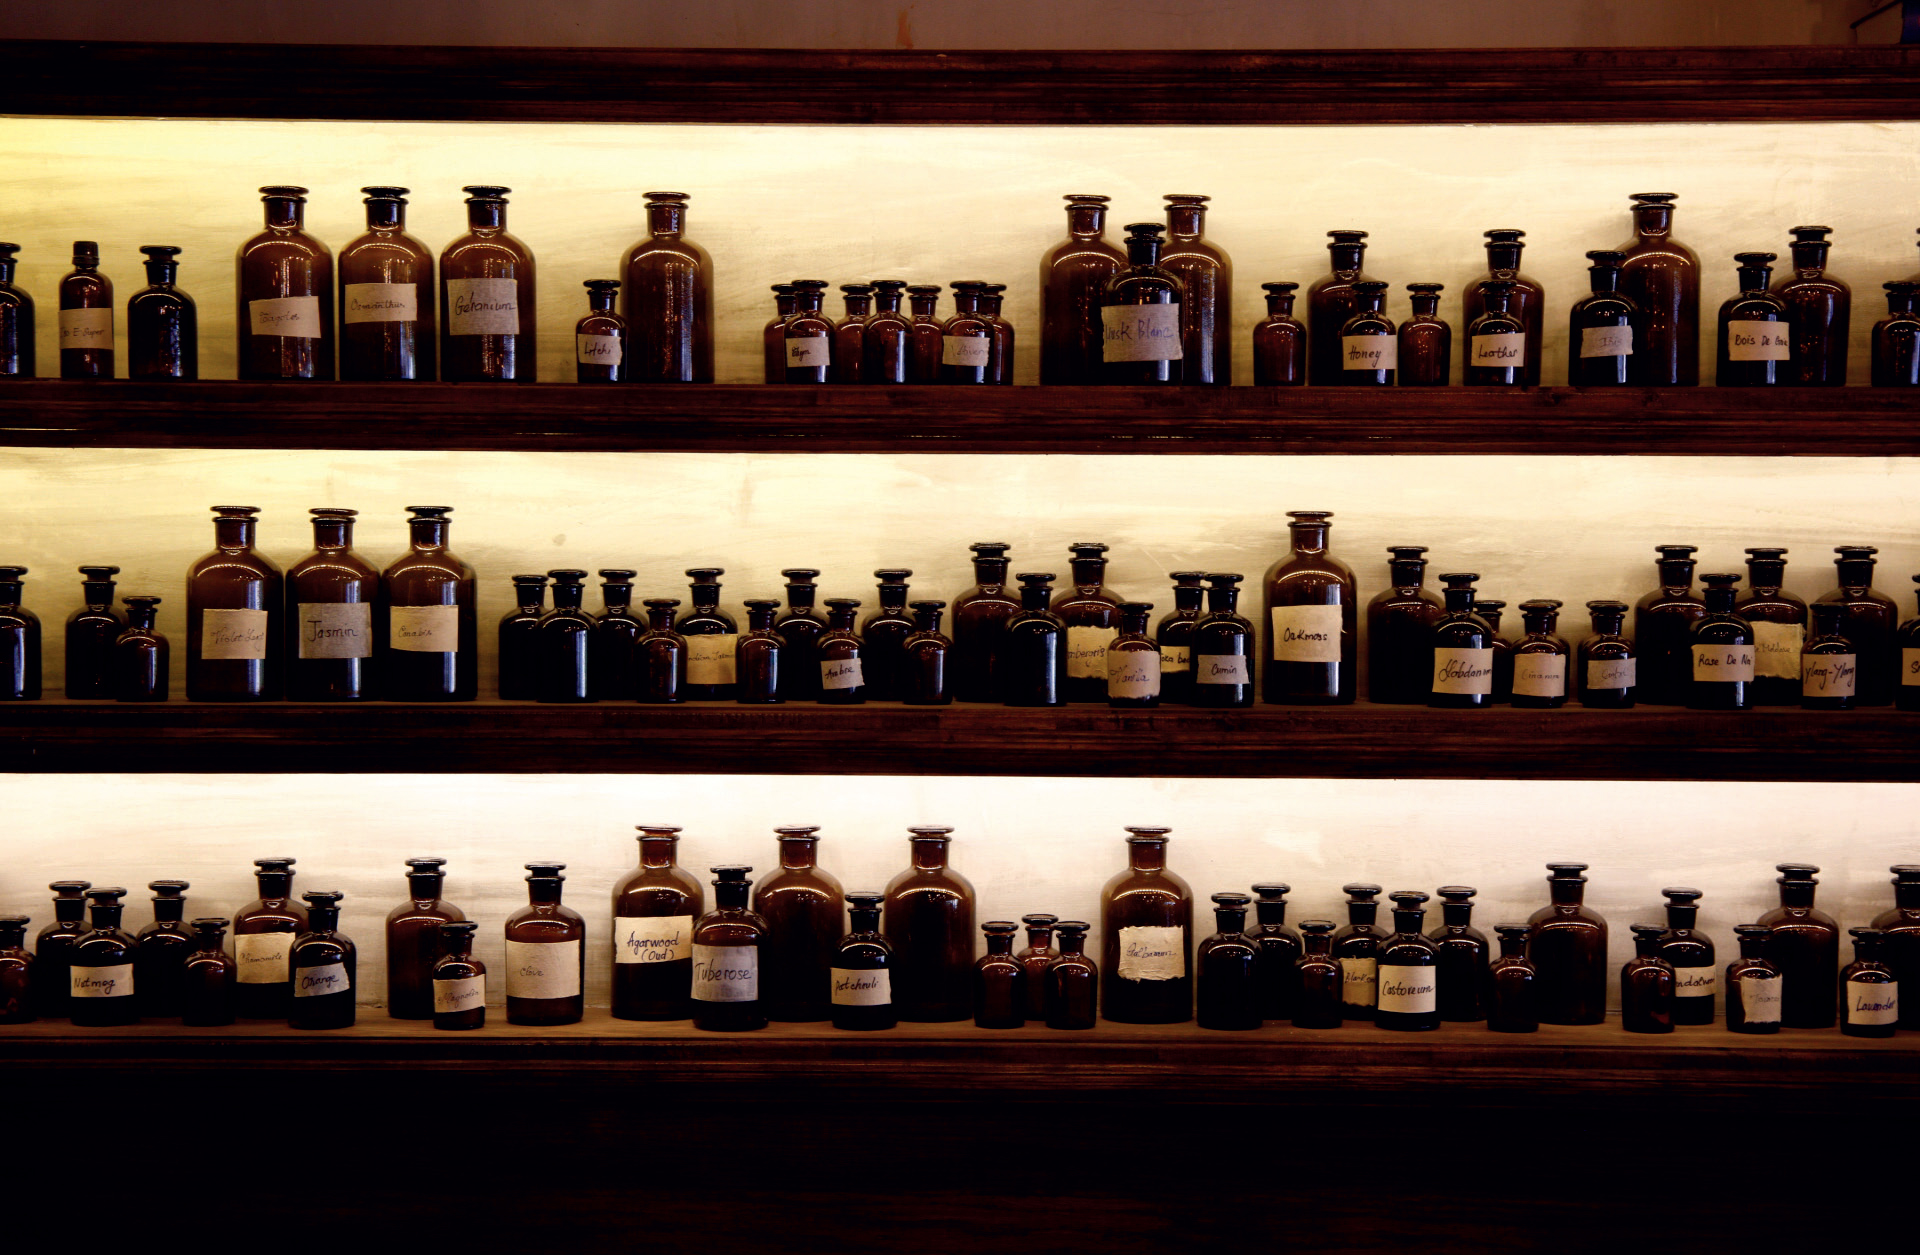 The perfume library is displayed with many special scents